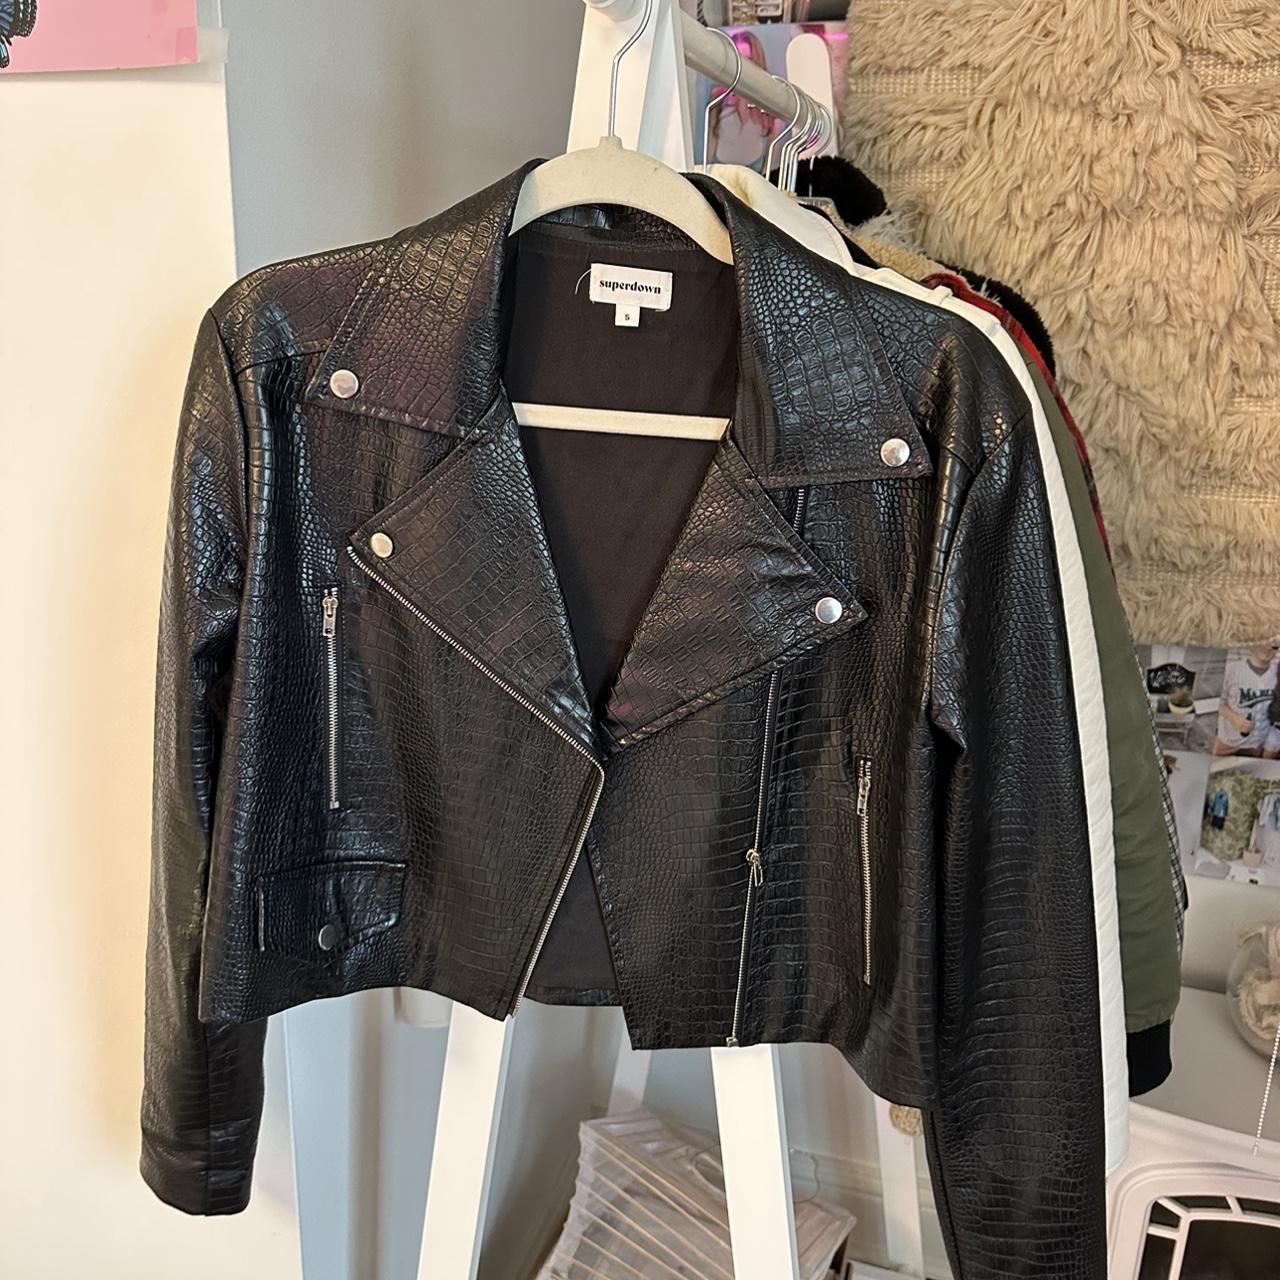 Super down leather jacket Size small - Depop